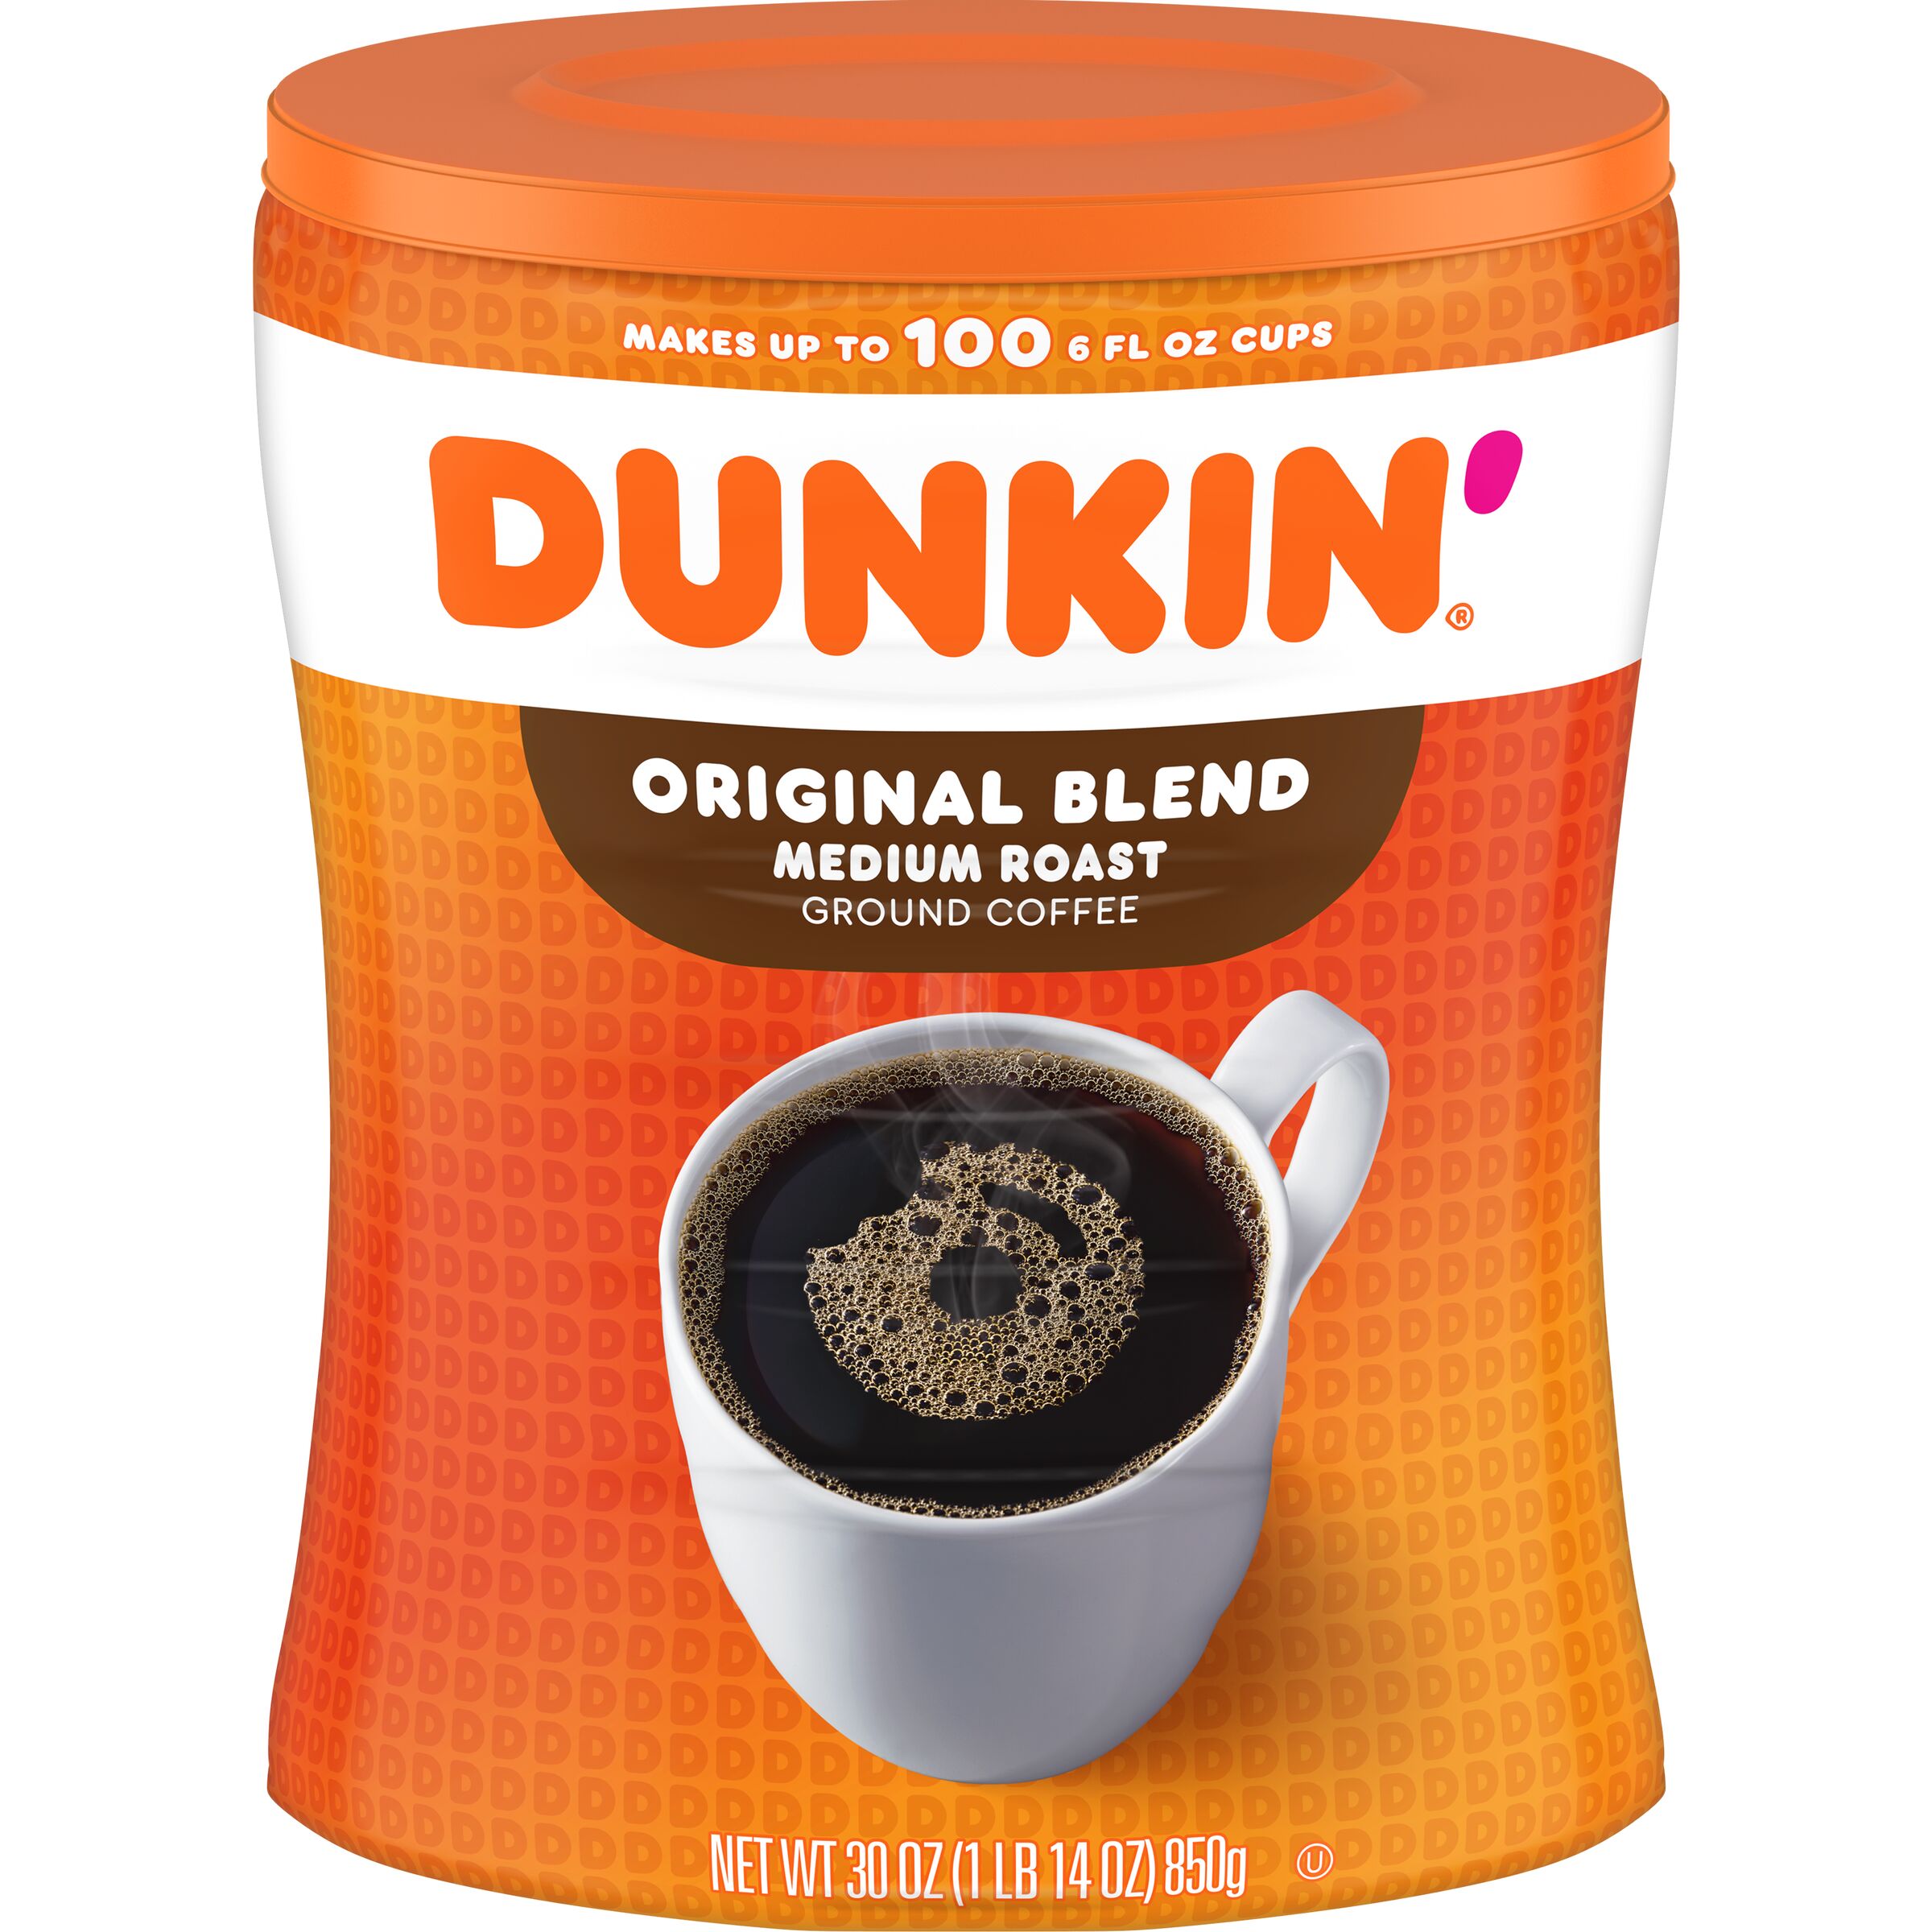 Dunkin' Original Blend, Medium Roast Coffee, 30-Ounce Canister (Packaging May Vary)